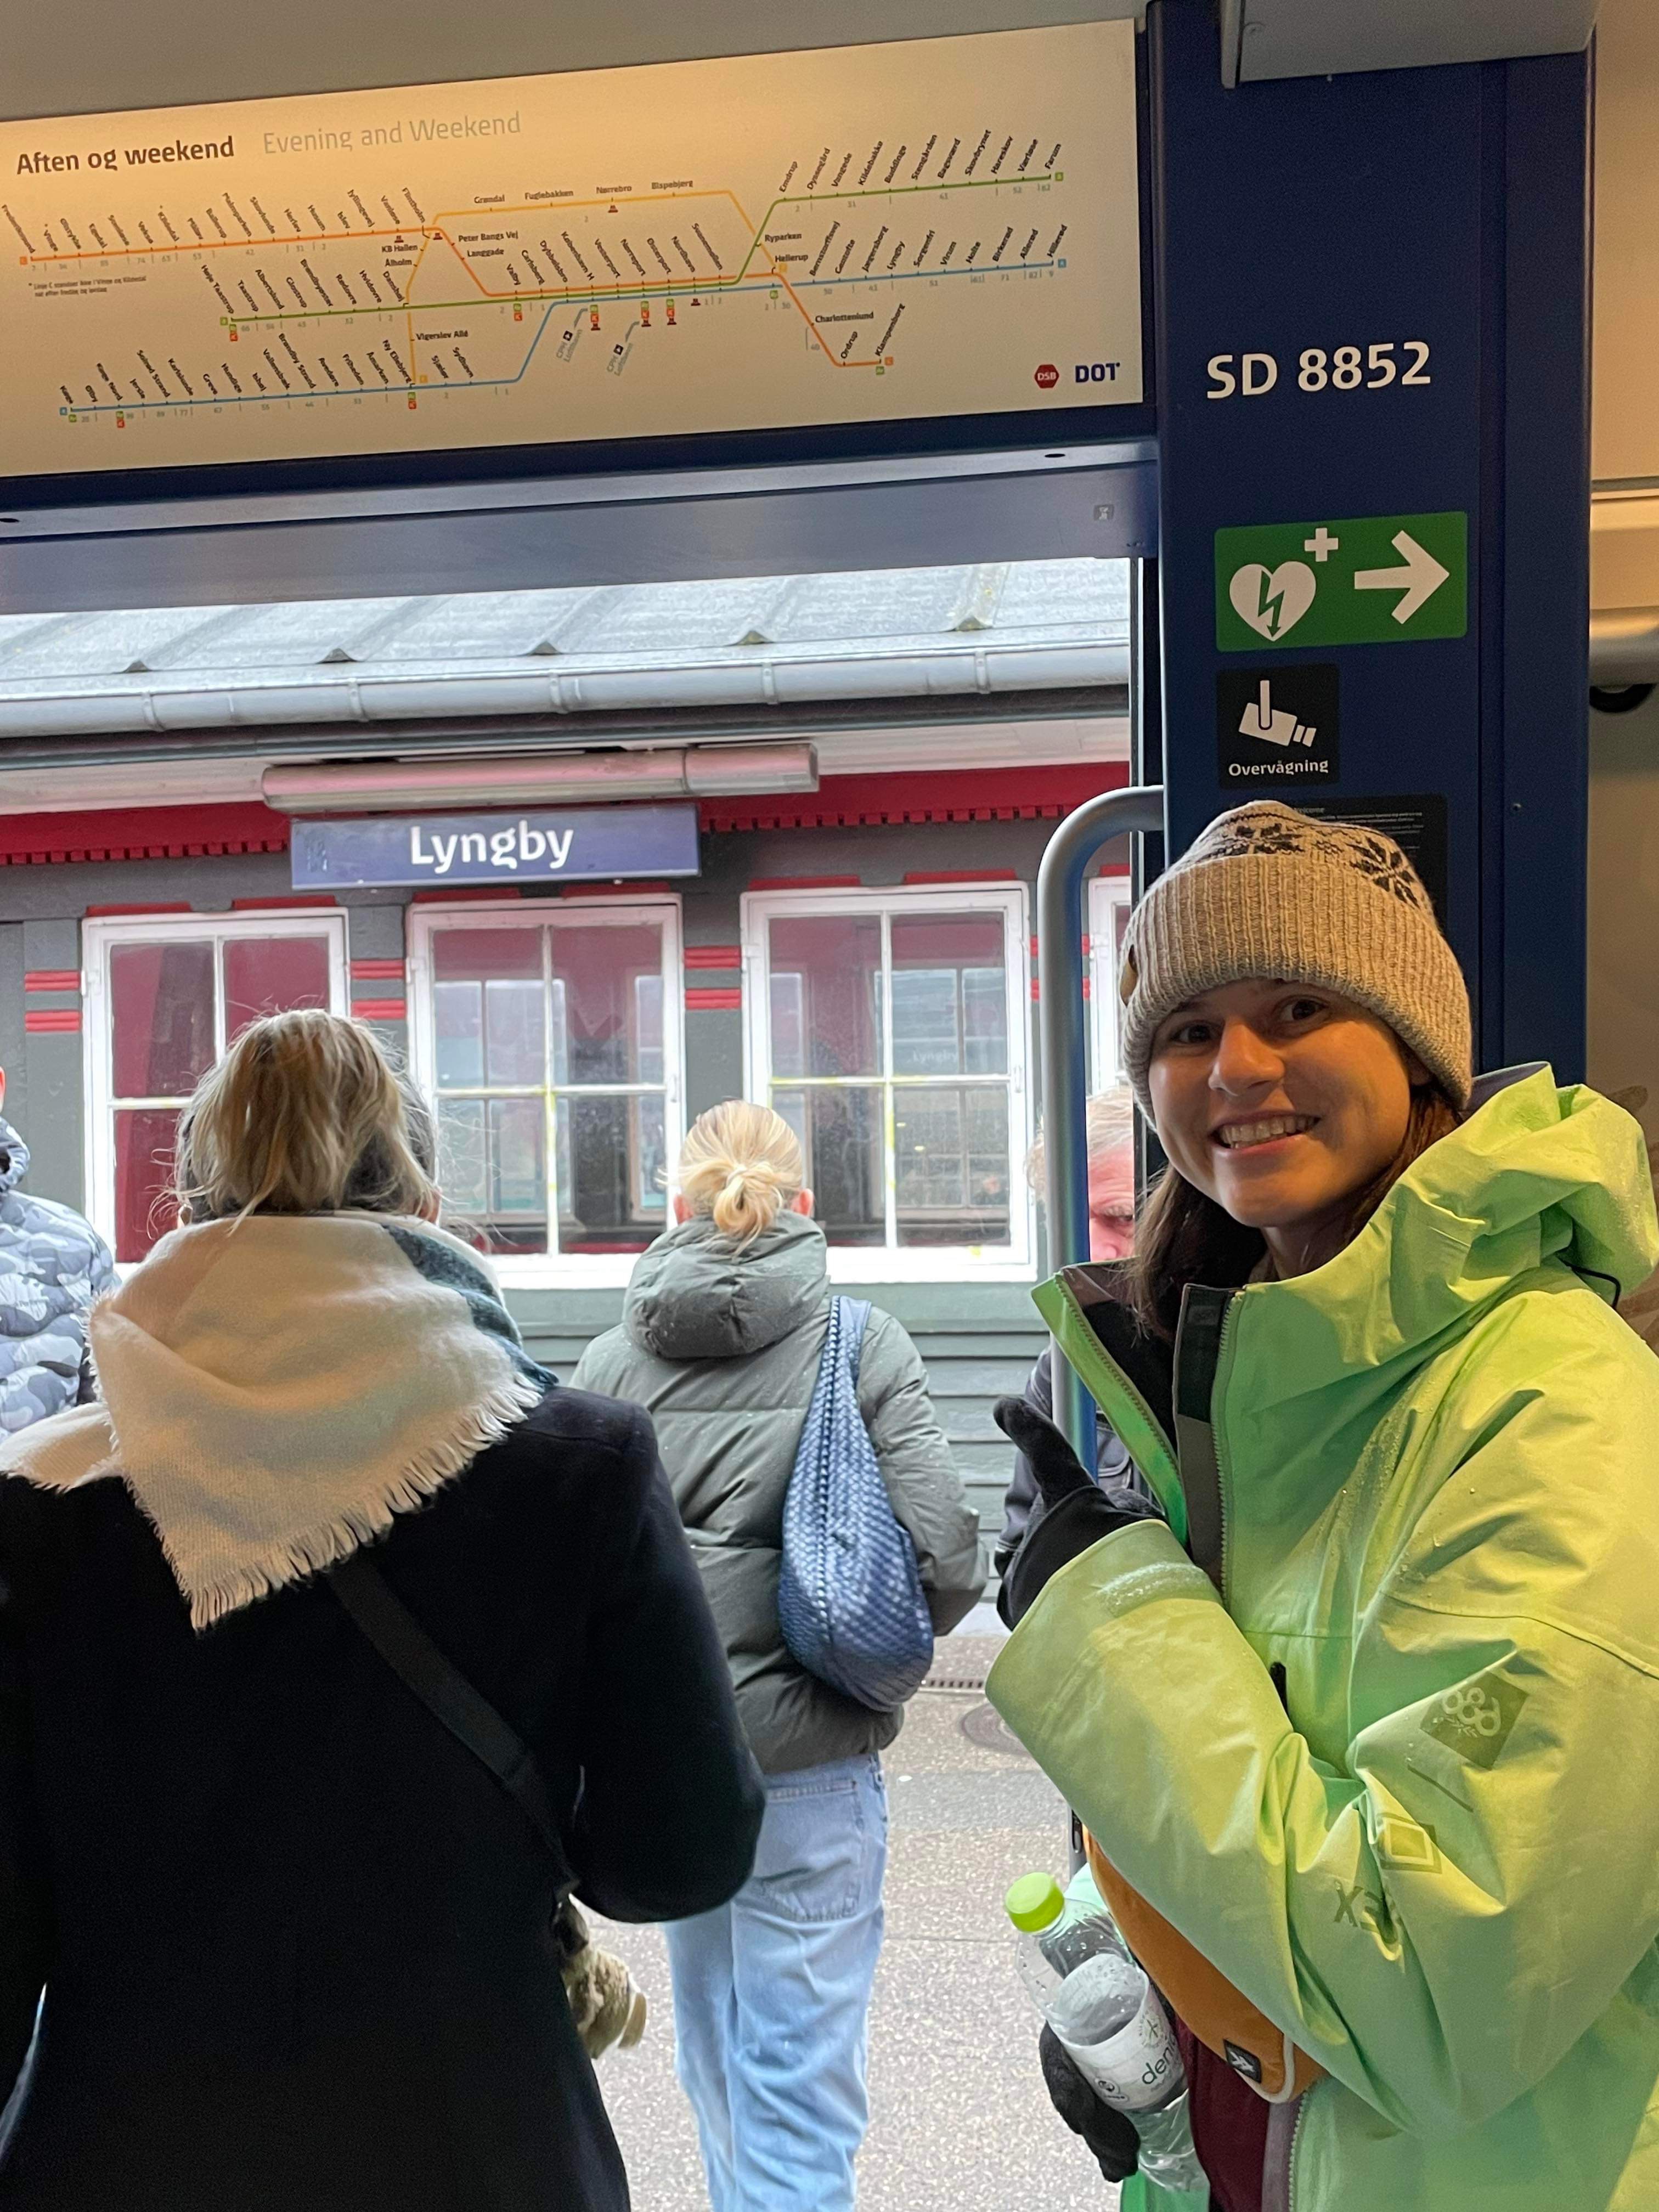 Shayna Keller poses next to a sign for Lyngby near public transport.